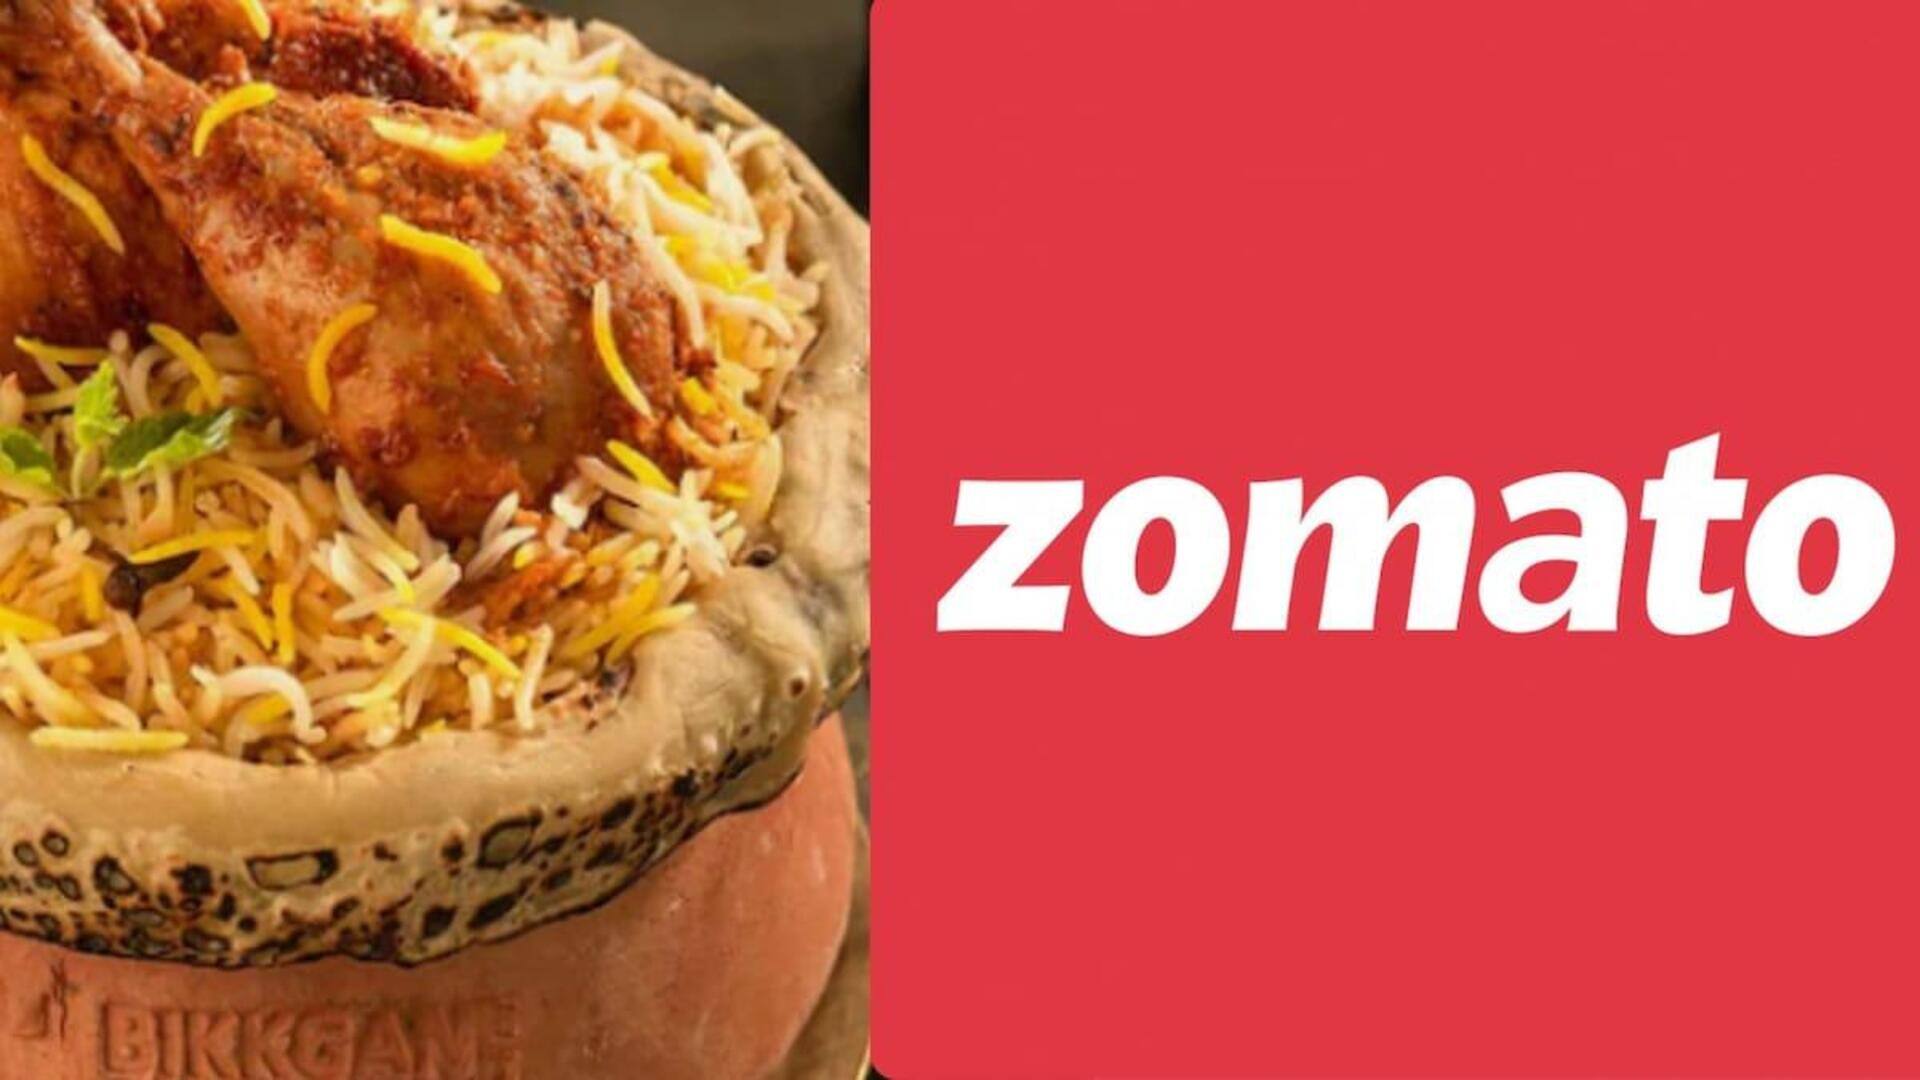 Biryani is most-ordered dish on Zomato in 2023